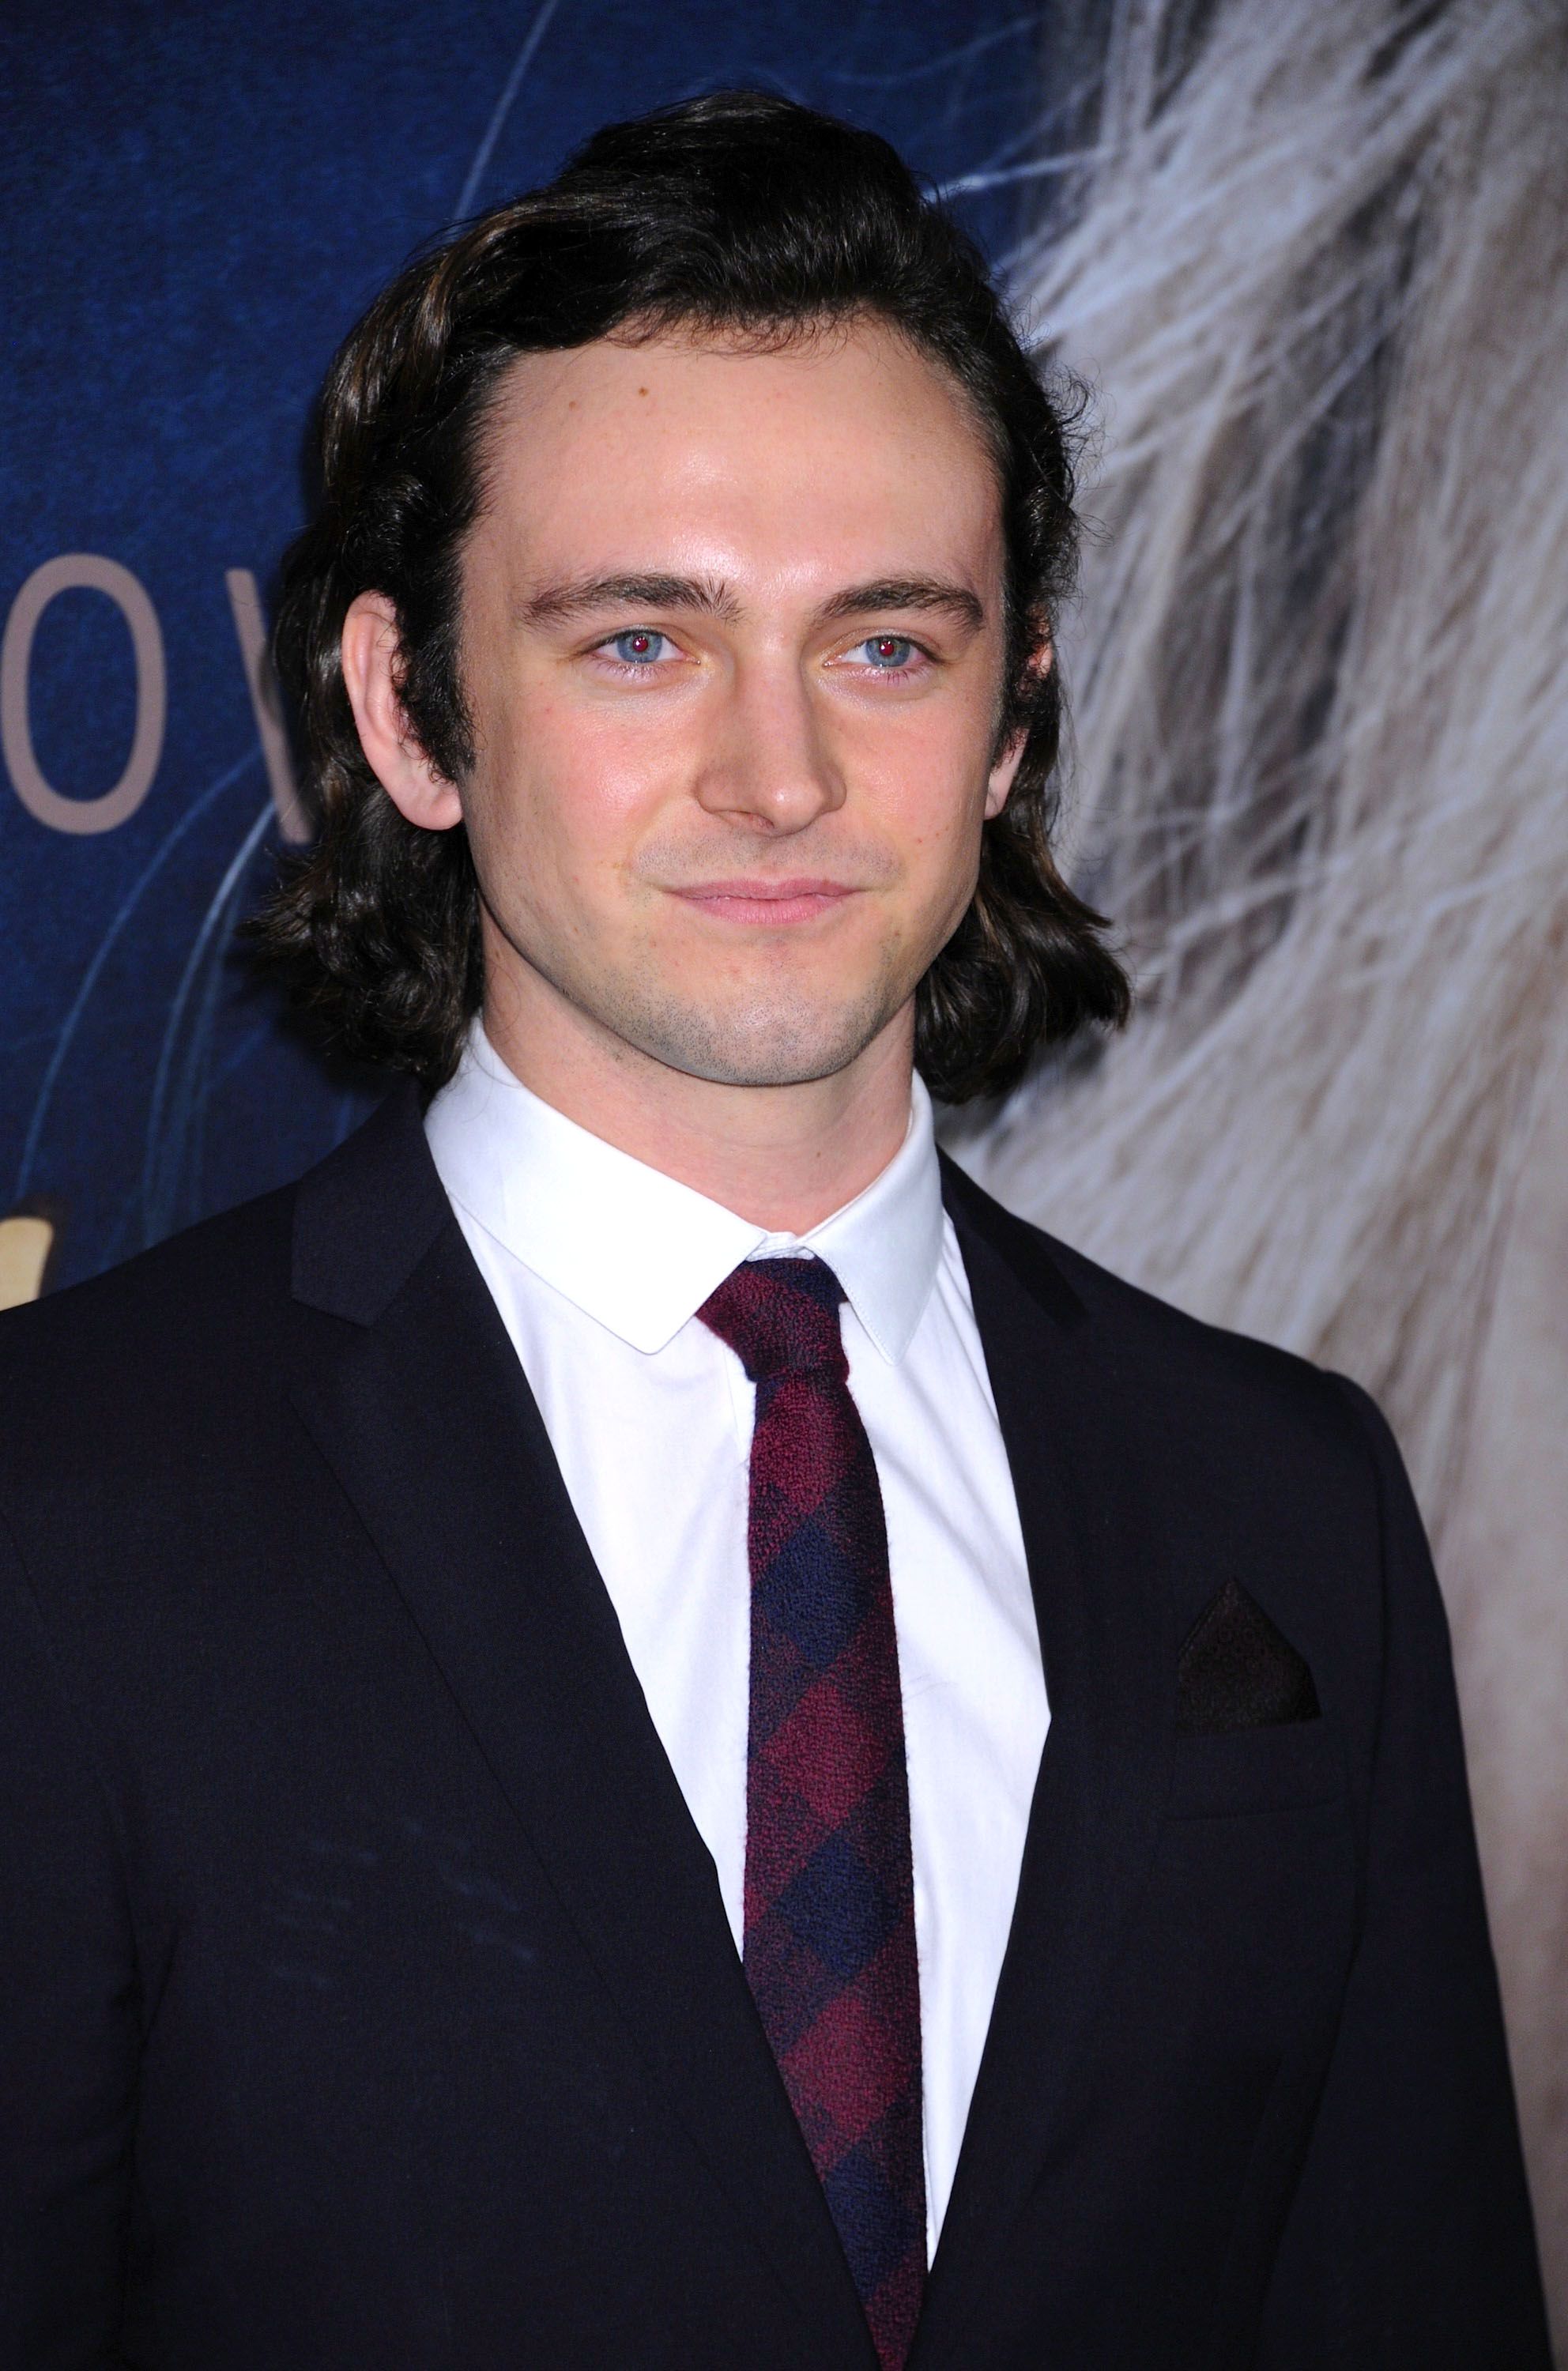 George Blagden in a suit